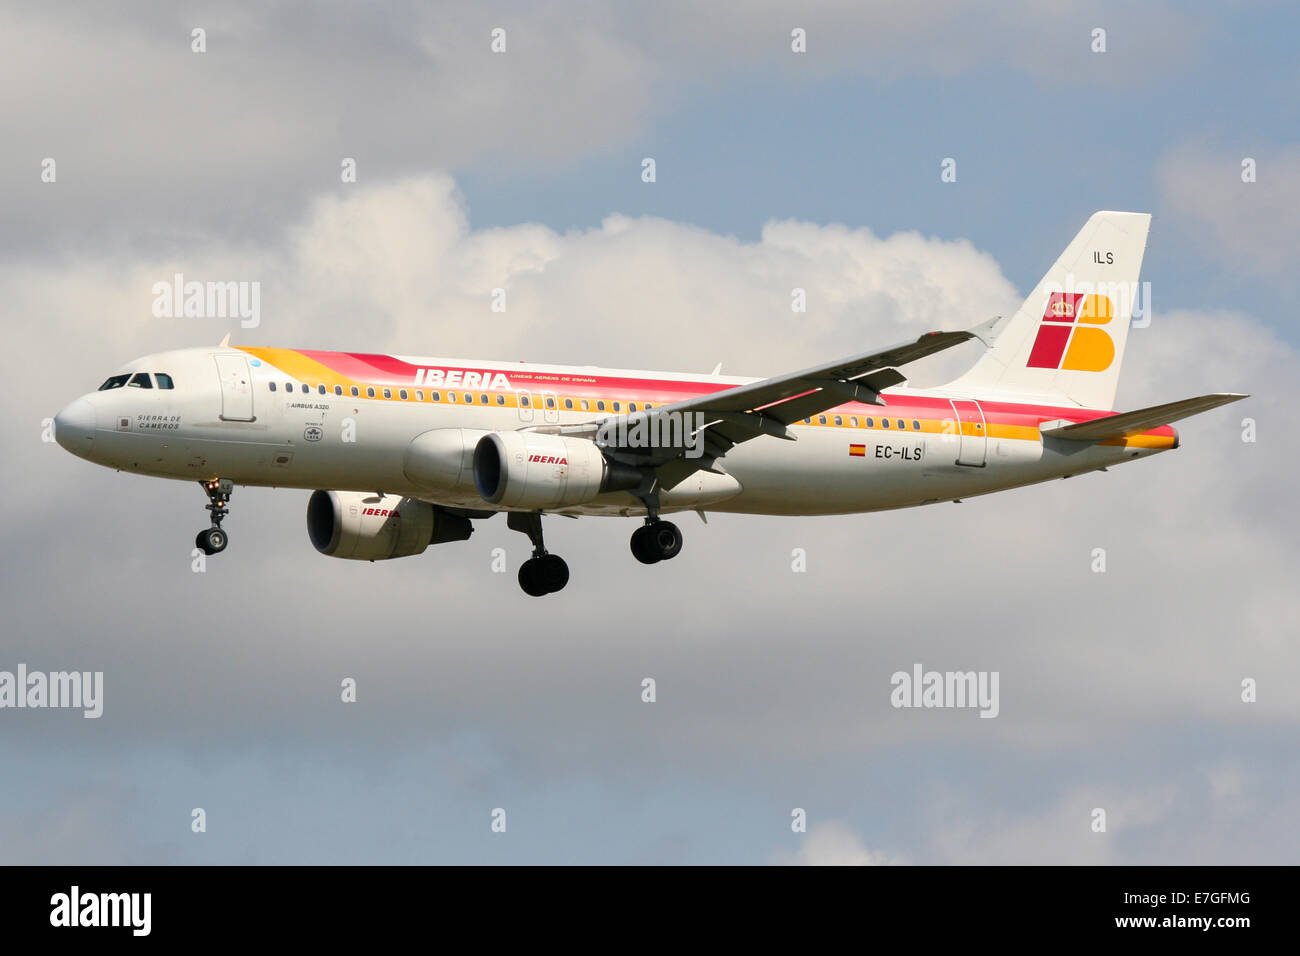 Iberia Airbus A320 approaches runway 27L at London Heathrow airport. Stock Photo